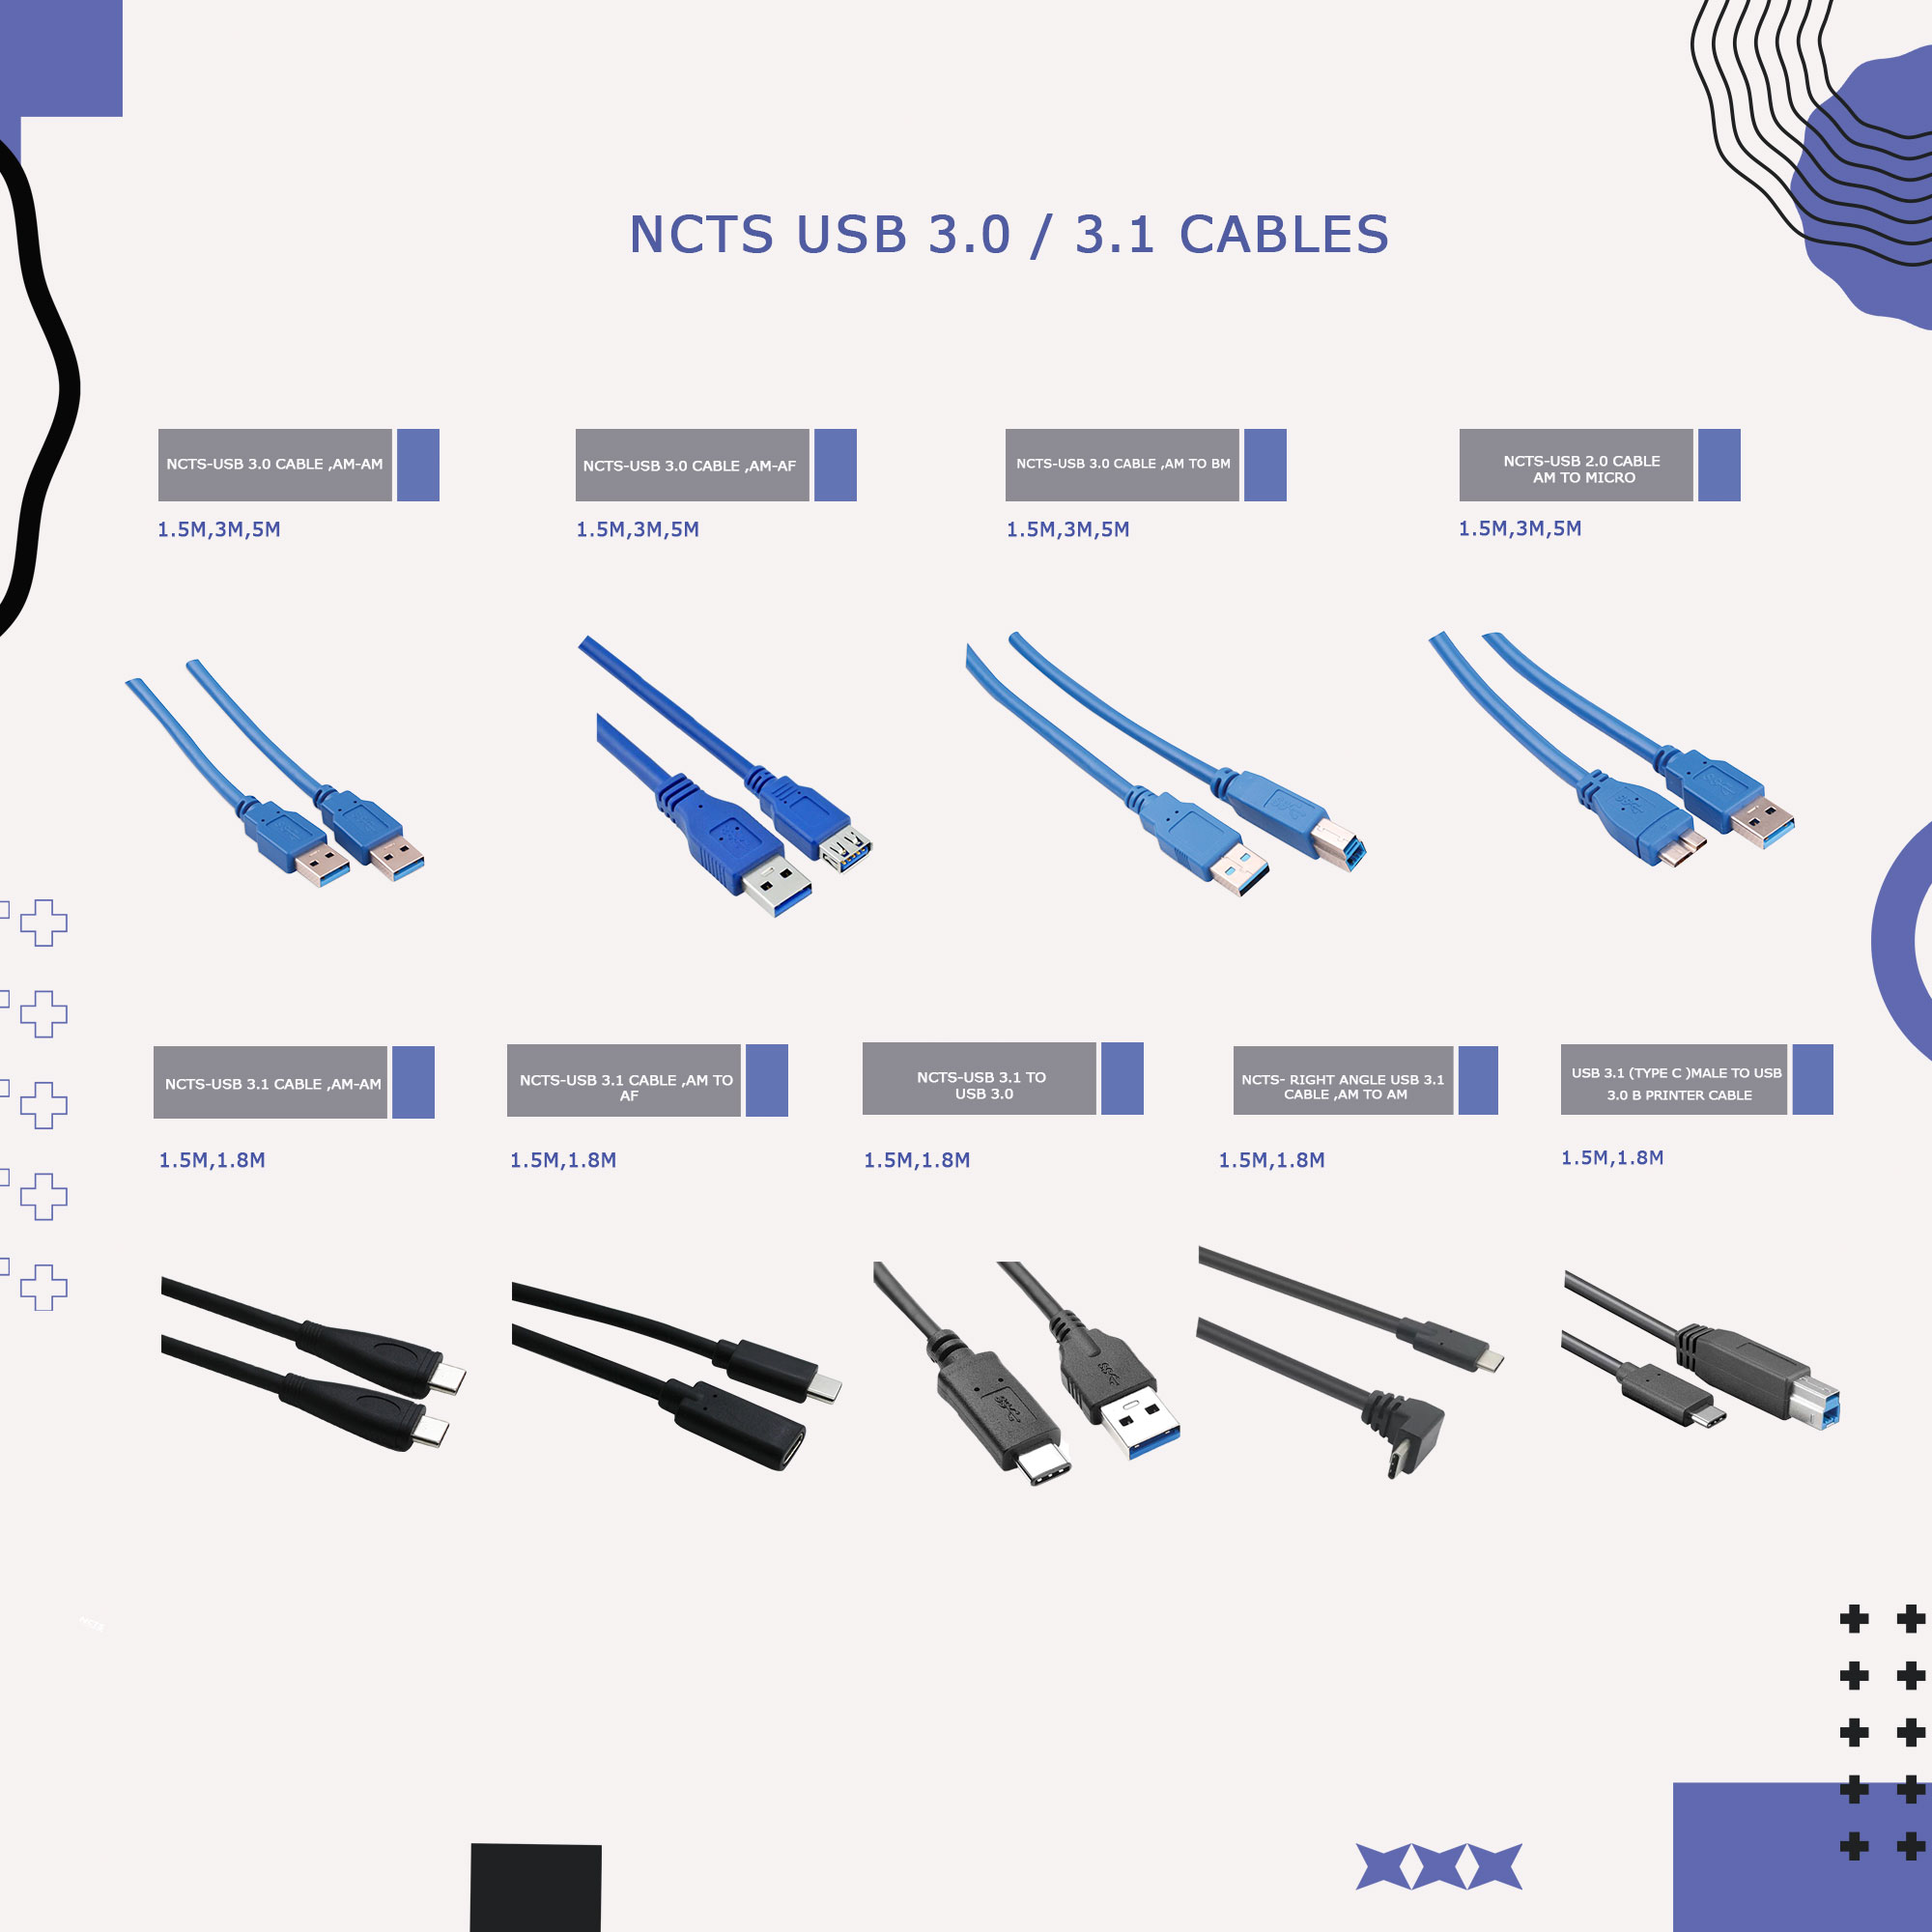 NCTS USB 3.0,3.1 CABLES